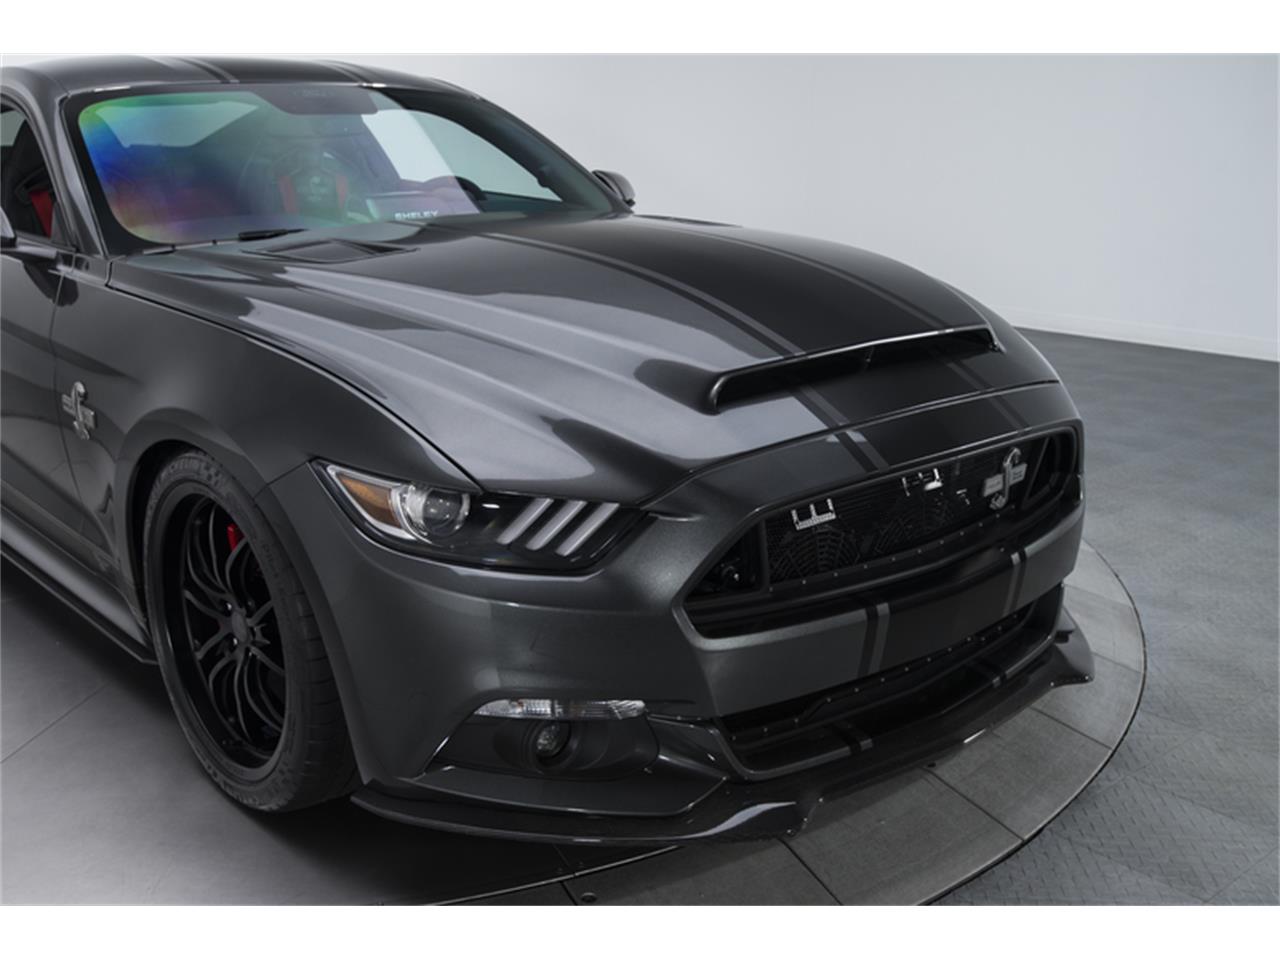 2016 Ford Mustang Super Snake for Sale | ClassicCars.com | CC-942155